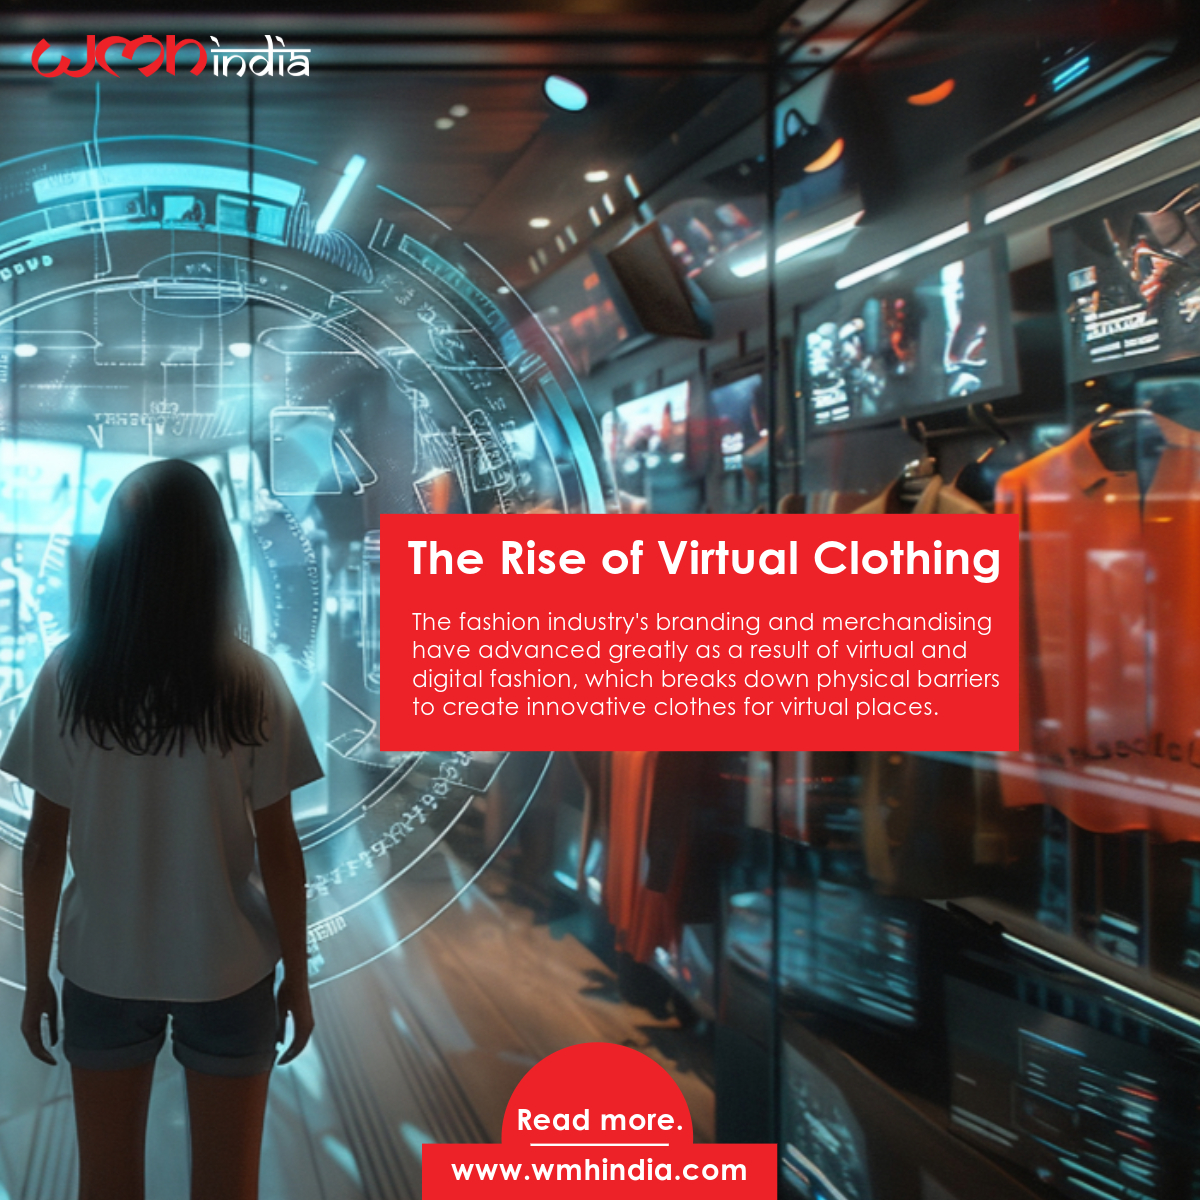 Step into the future of fashion with virtual clothing! Explore how digital designs are reshaping our closets and our concepts of style.
.
Read the Article  for more details, link in bio
.
Follow Us -WMHIN
.
#wmhin #VirtualFashion #DigitalWardrobe #FutureOfFashion #EcoChic